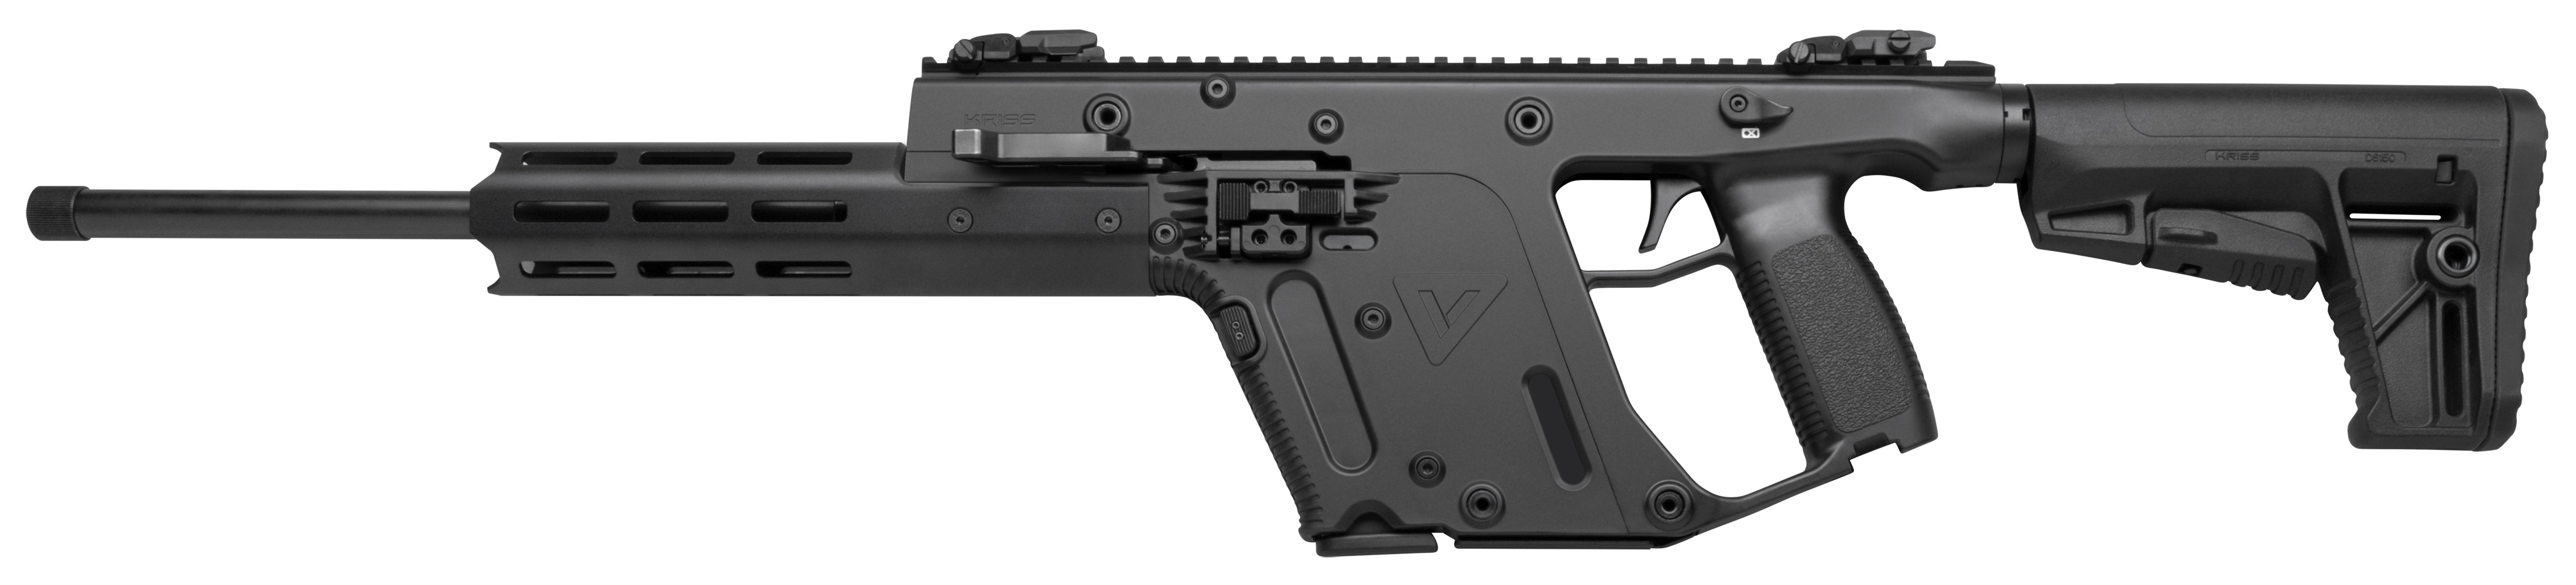 KRISS VECTOR CRB G2 22LR 16" FXD STOCK 10RD BLK